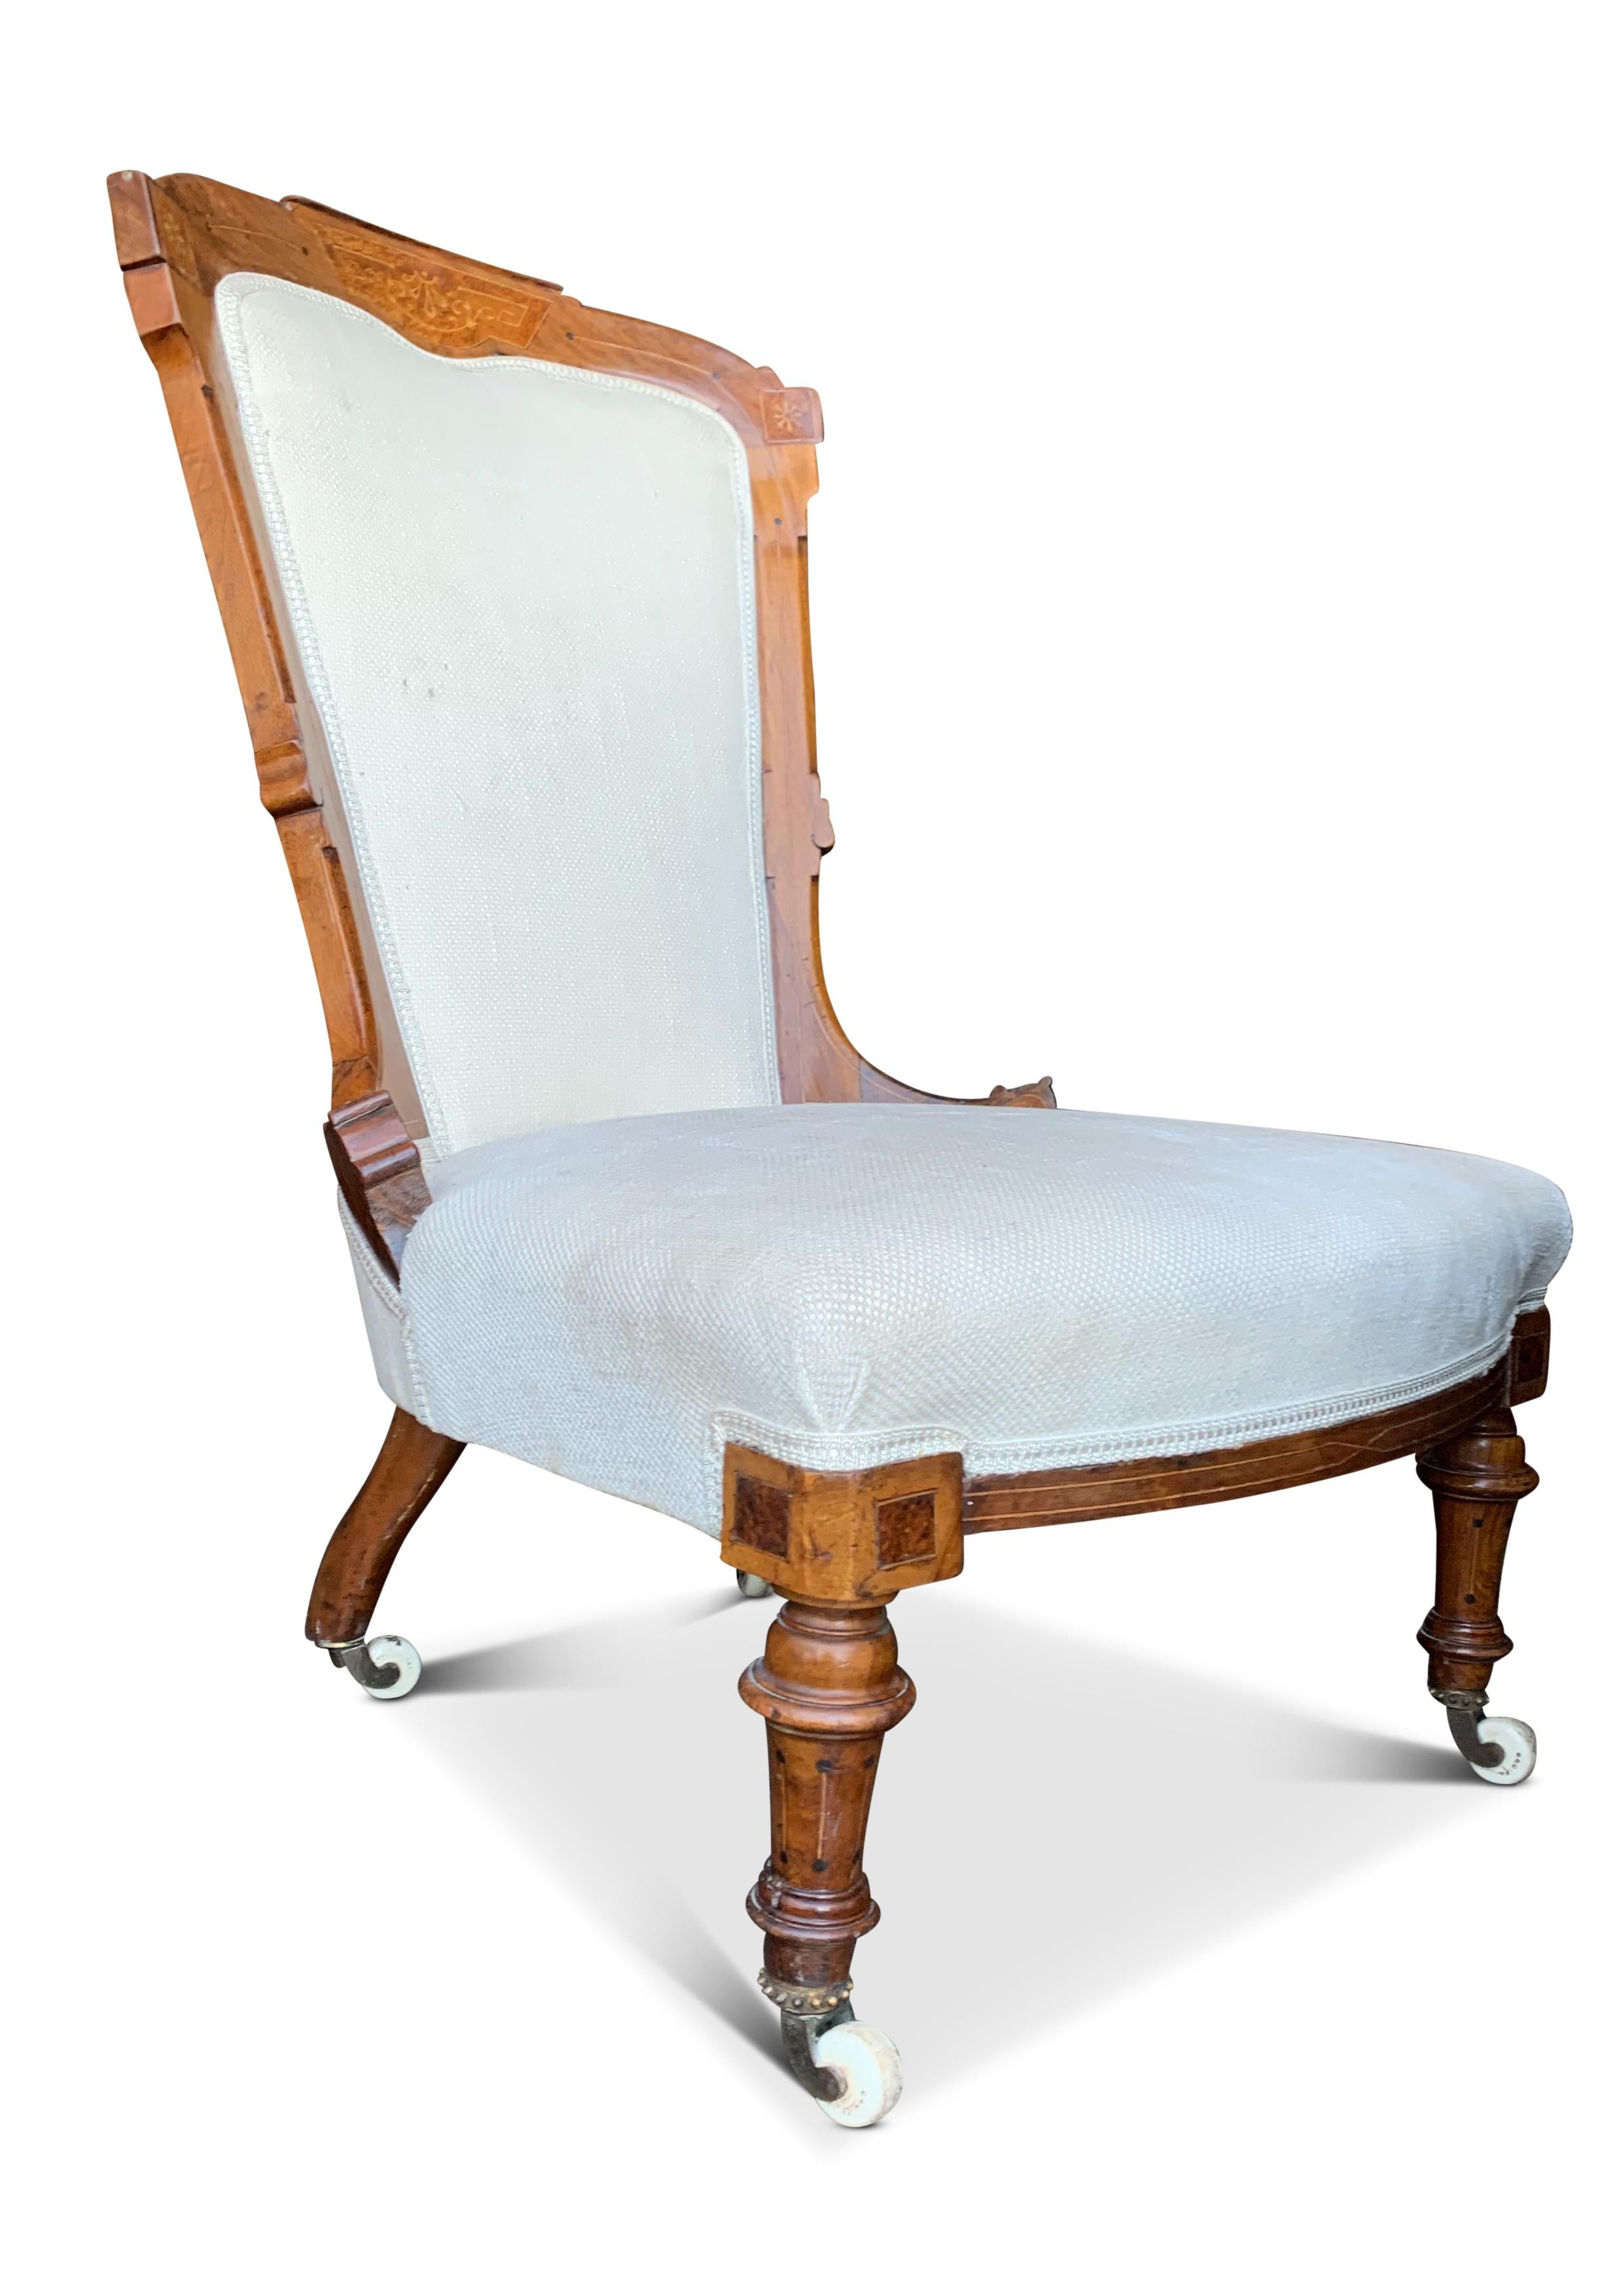 19th Century An Empire Walnut Upholstered Salon Chair With Decorative Inlay & Ceramic Castors For Sale